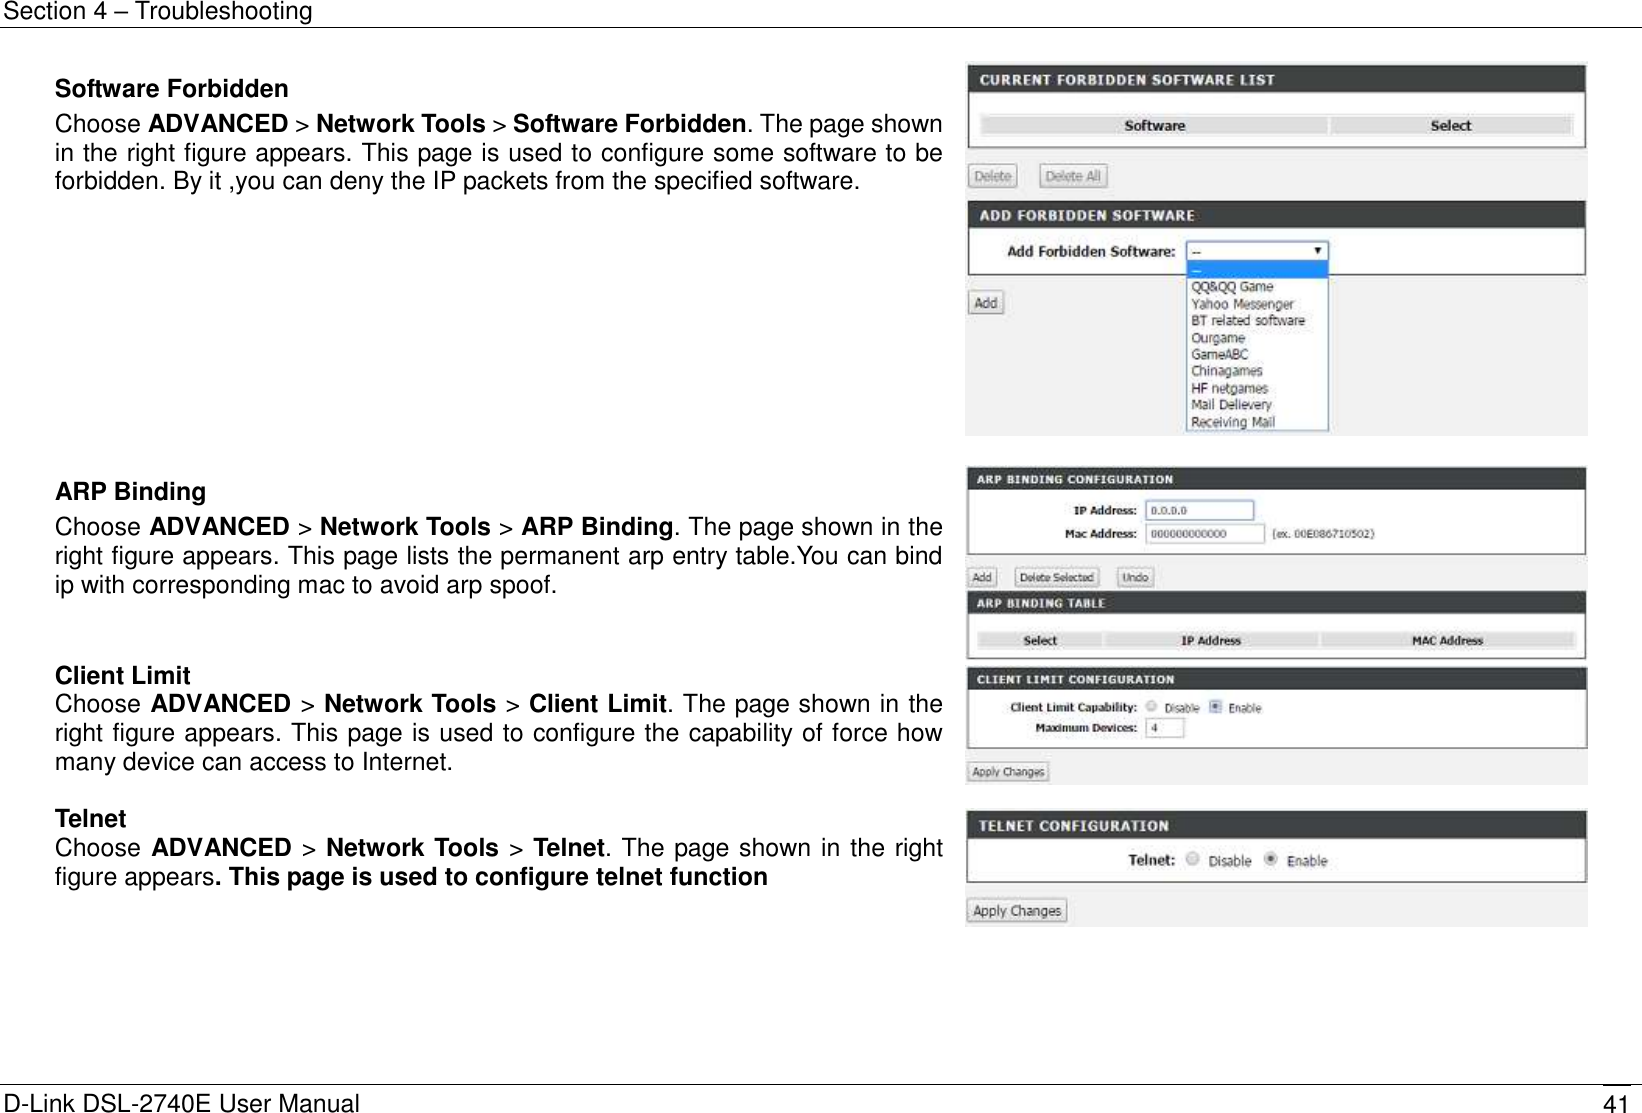 Section 4 – Troubleshooting D-Link DSL-2740E User Manual 41 Software Forbidden Choose ADVANCED &gt; Network Tools &gt; Software Forbidden. The page shown in the right figure appears. This page is used to configure some software to be forbidden. By it ,you can deny the IP packets from the specified software.   ARP Binding Choose ADVANCED &gt; Network Tools &gt; ARP Binding. The page shown in the right figure appears. This page lists the permanent arp entry table.You can bind ip with corresponding mac to avoid arp spoof.  Client Limit Choose ADVANCED &gt; Network Tools &gt; Client Limit. The page shown in the right figure appears. This page is used to configure the capability of force how many device can access to Internet.   Telnet Choose ADVANCED &gt; Network Tools &gt; Telnet. The page shown in the right figure appears. This page is used to configure telnet function  